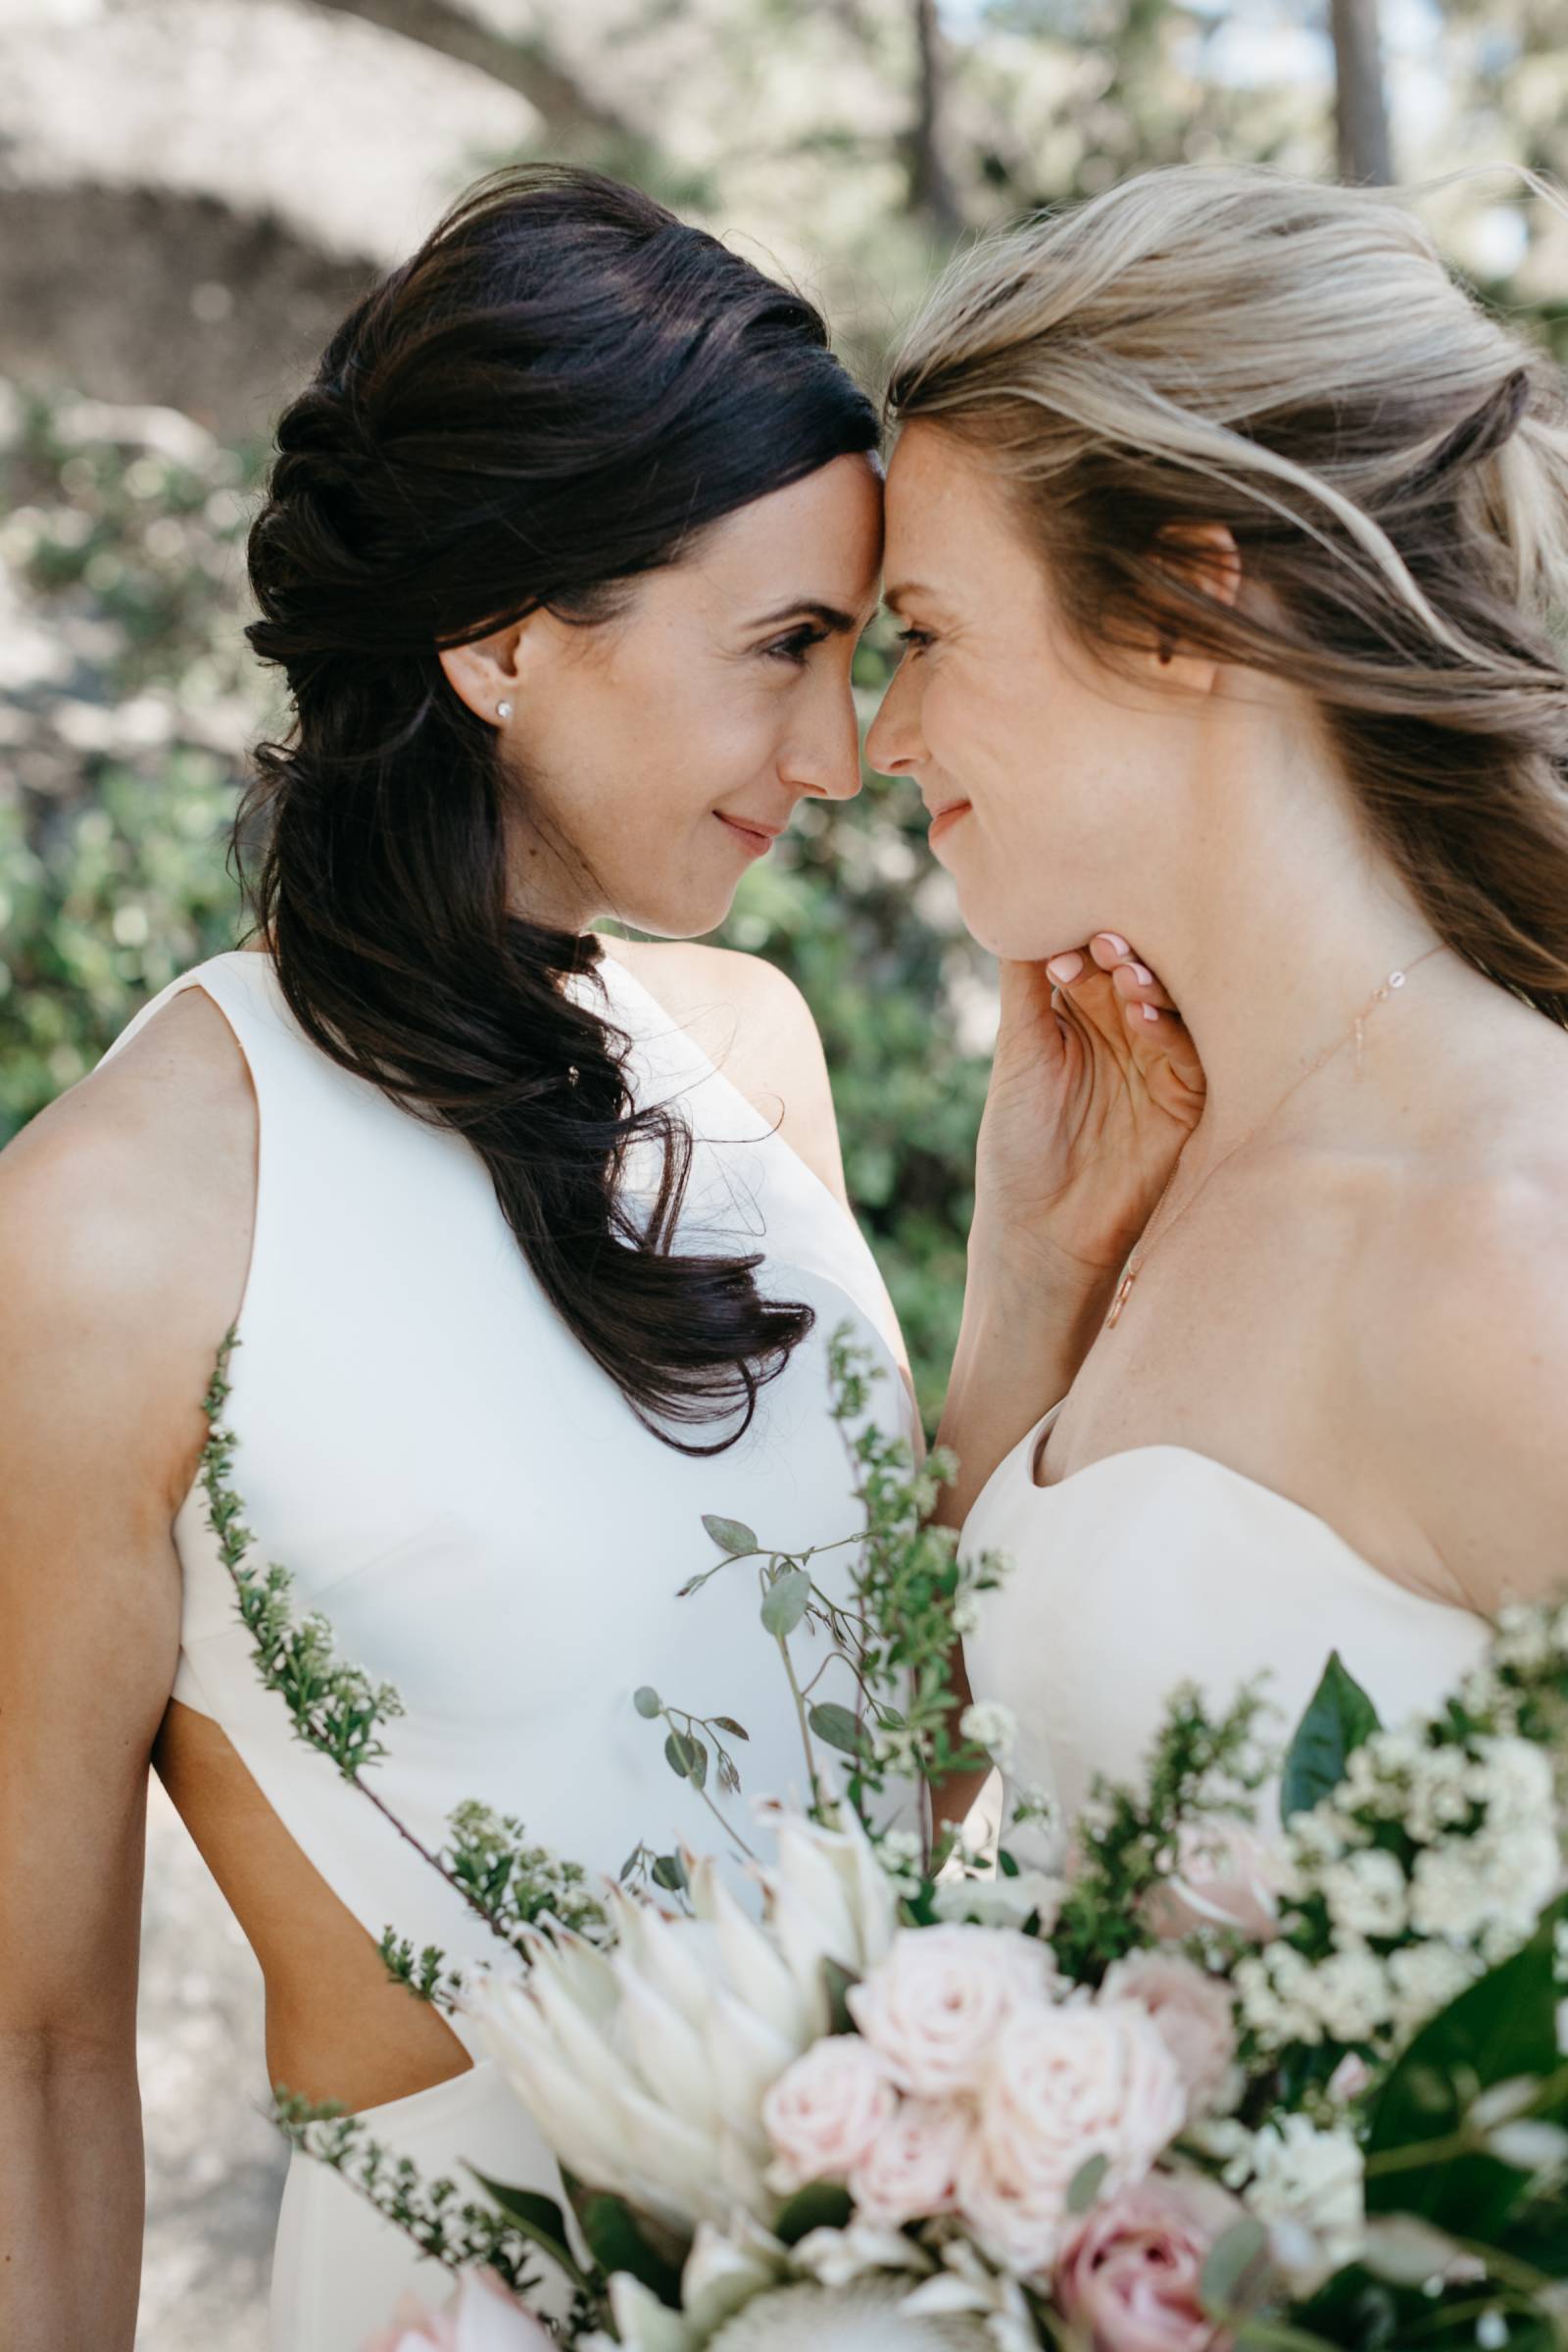 Two brides on their wedding day in lake tahoe